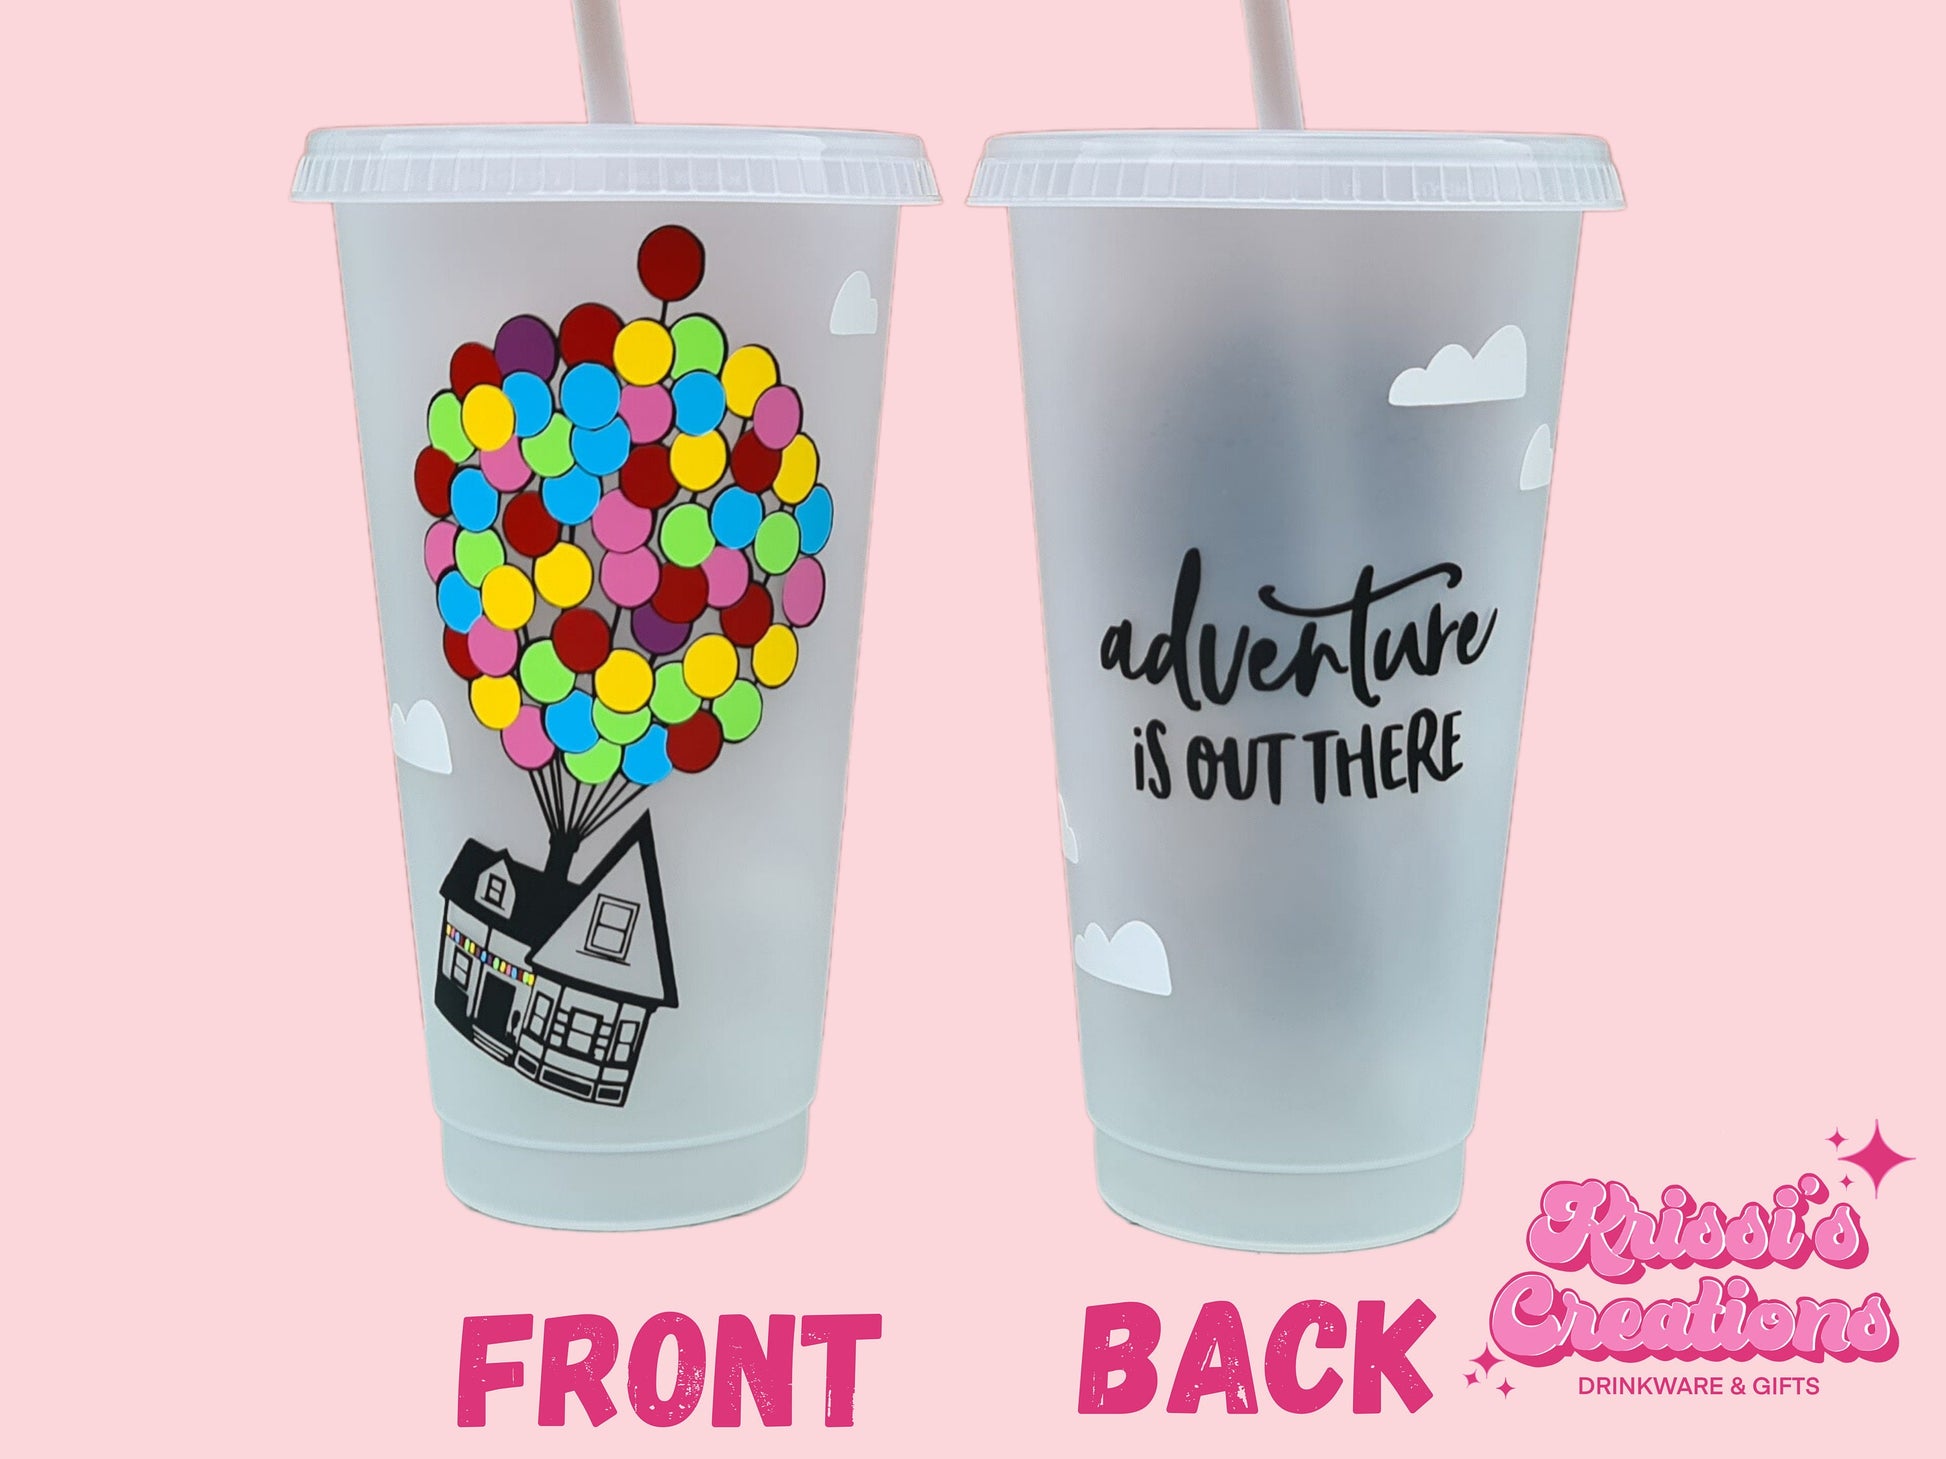 UP Movie Cold Cup Adventure Is Out There / Starbucks 24oz Tumbler / UP! Balloon House / Plastic Reusable cup with lid and straw